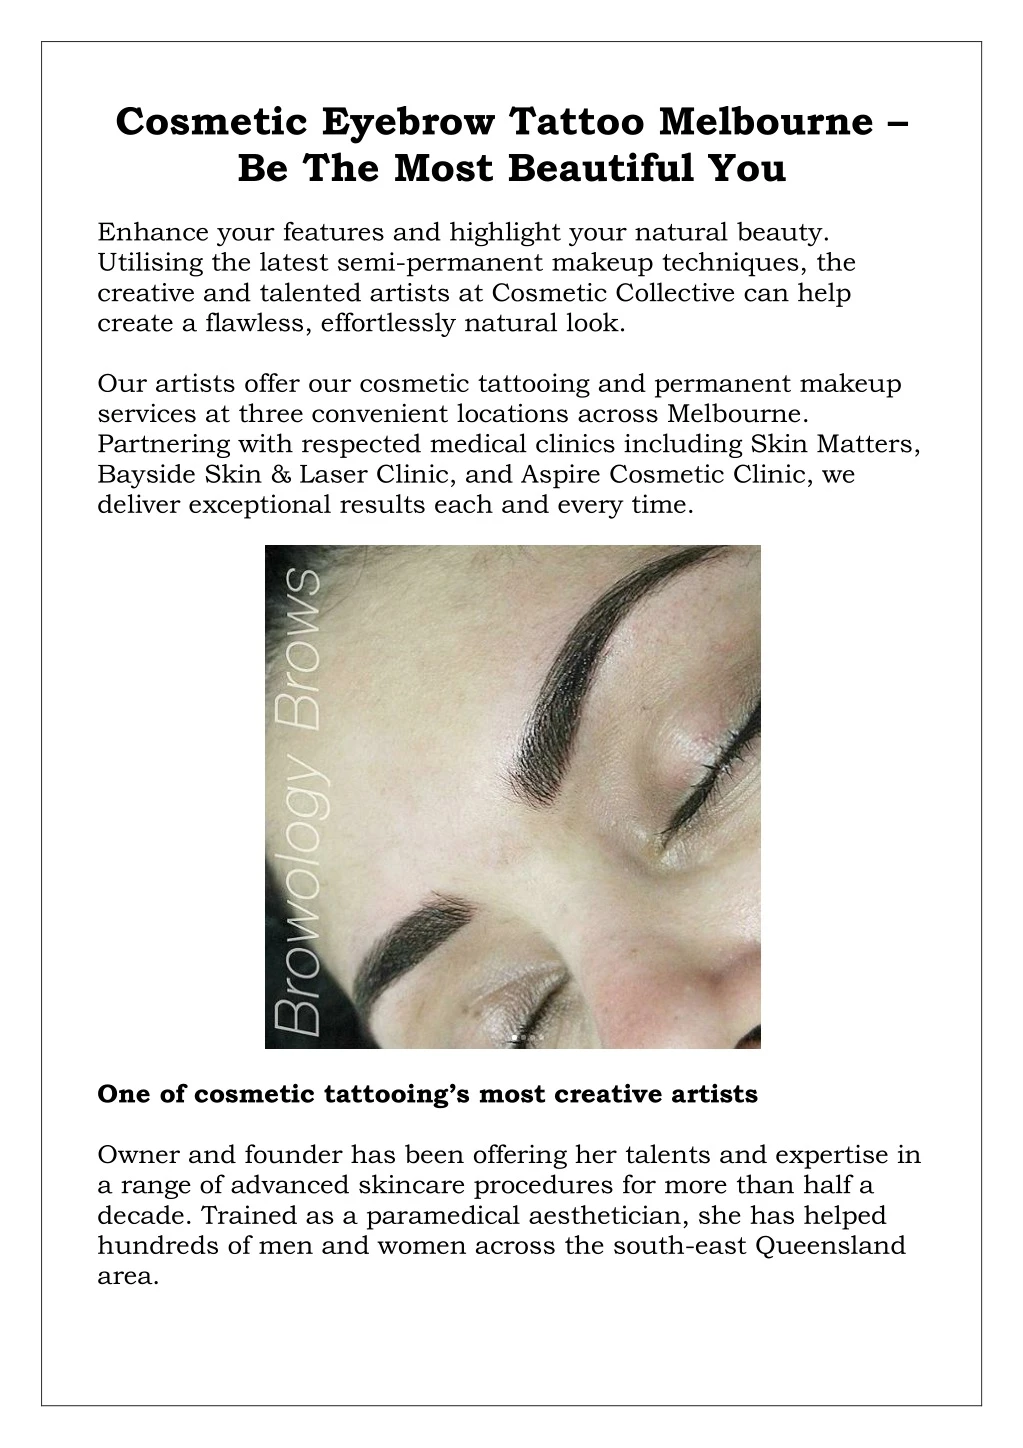 cosmetic eyebrow tattoo melbourne be the most